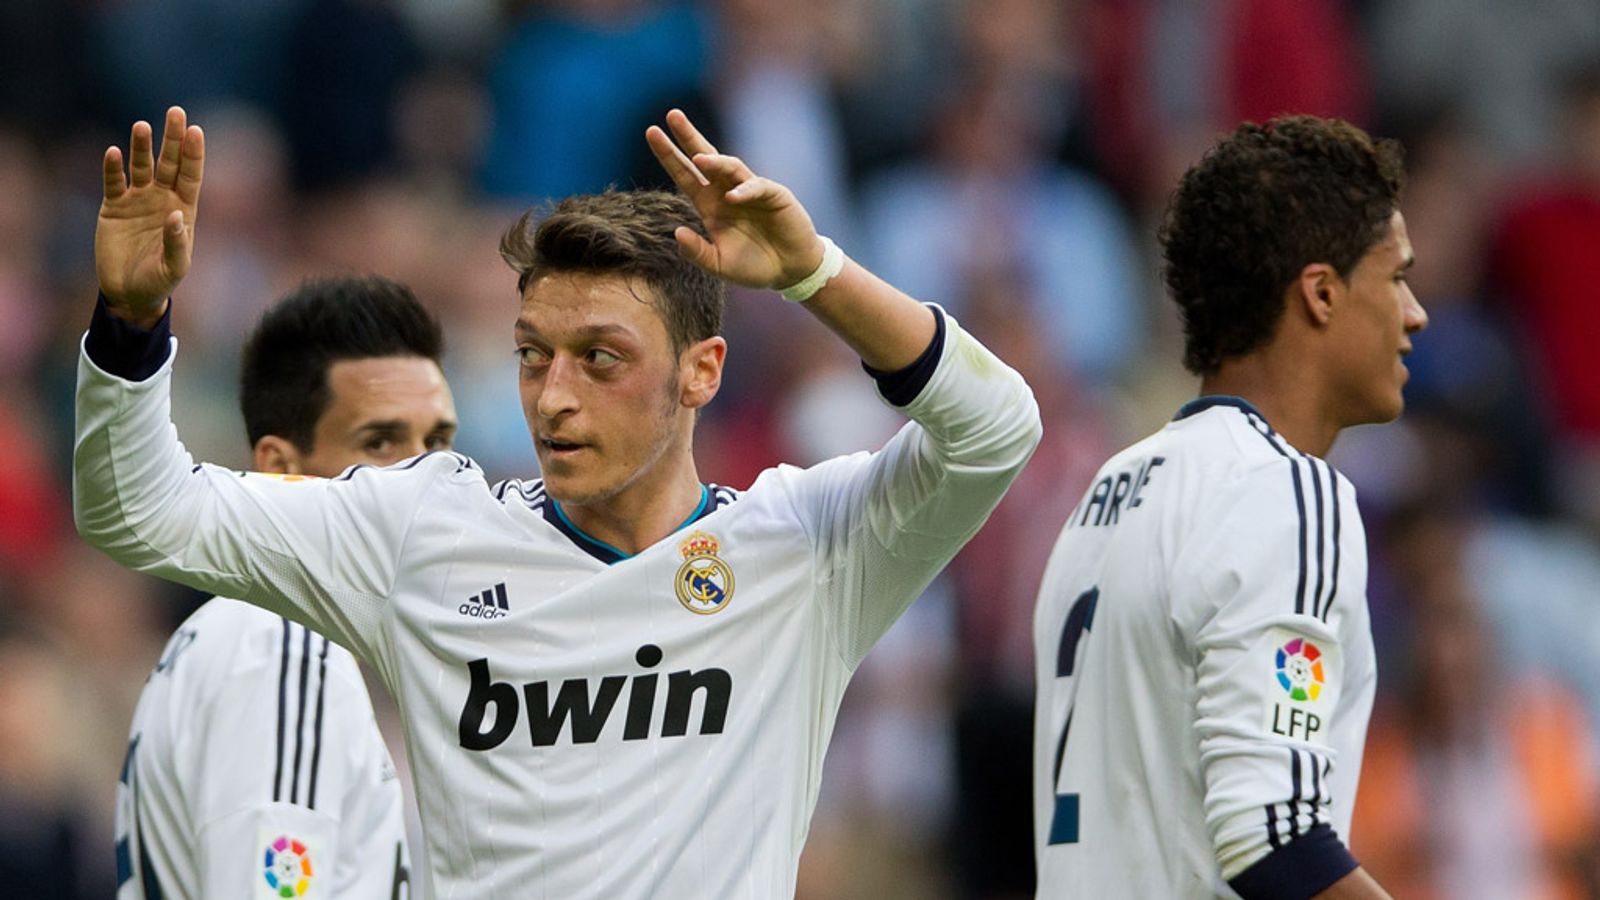 Transfer news: Real Madrid midfielder Mesut Ozil says he is staying at the  Bernabeu, Football News